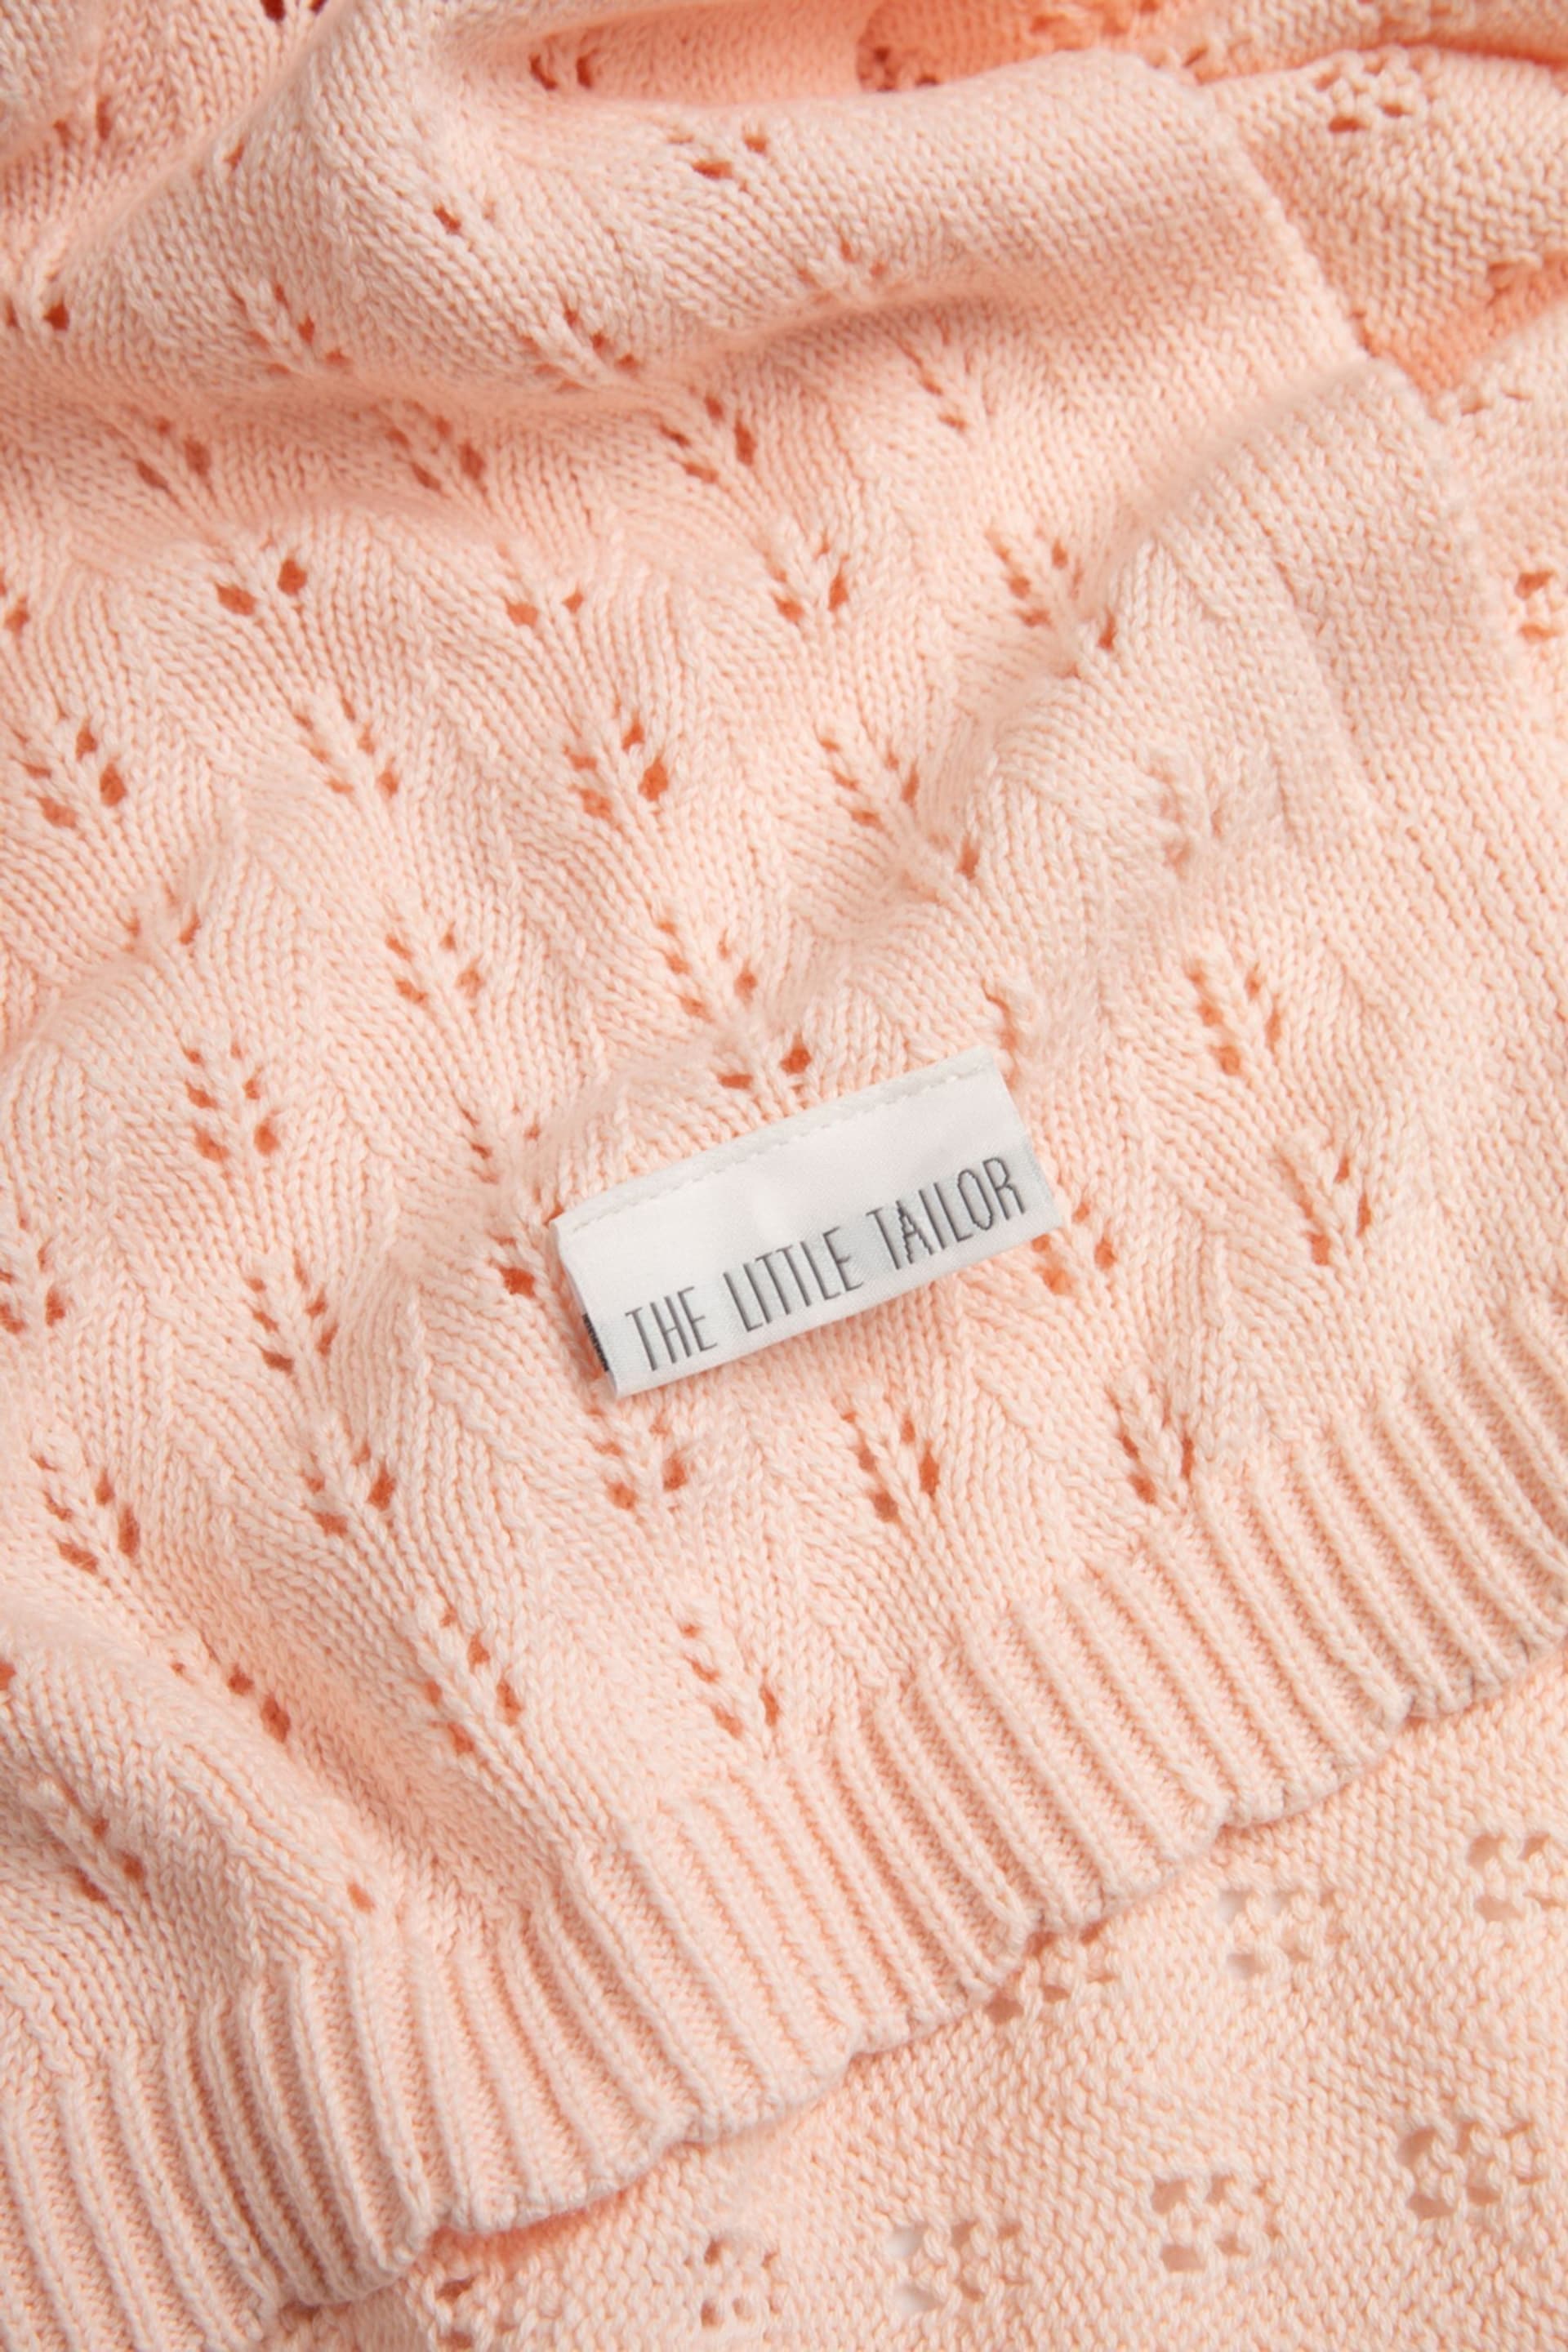 The Little Tailor Pink Cotton Pointelle Knitted Blanket - Image 2 of 5